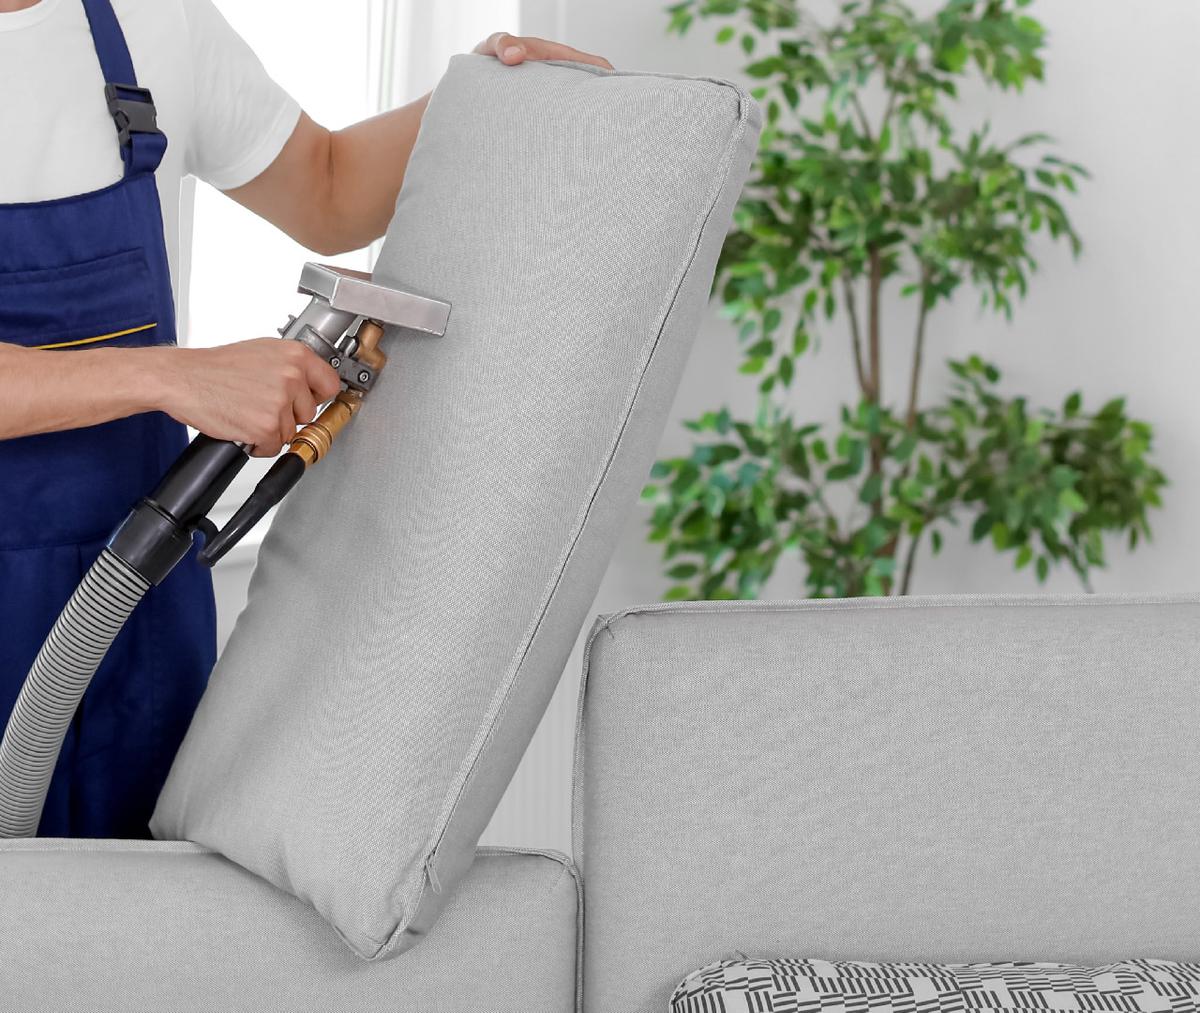 Cushion cover dry cleaning